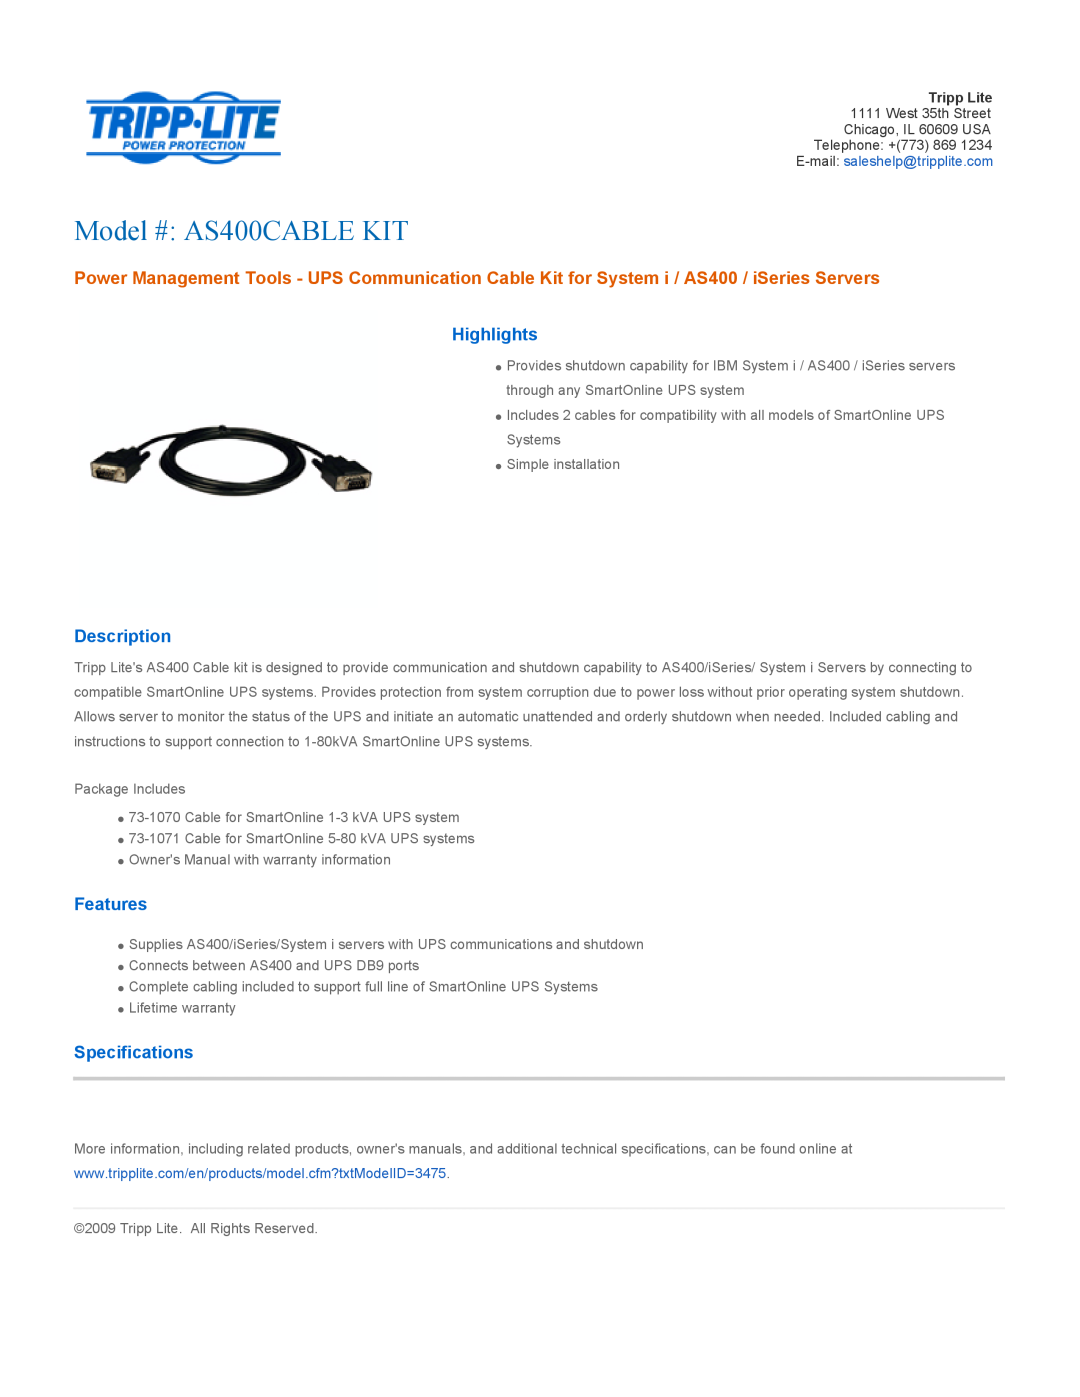 Tripp Lite specifications Model # AS400CABLE KIT, Highlights, Description, Features, Specifications 